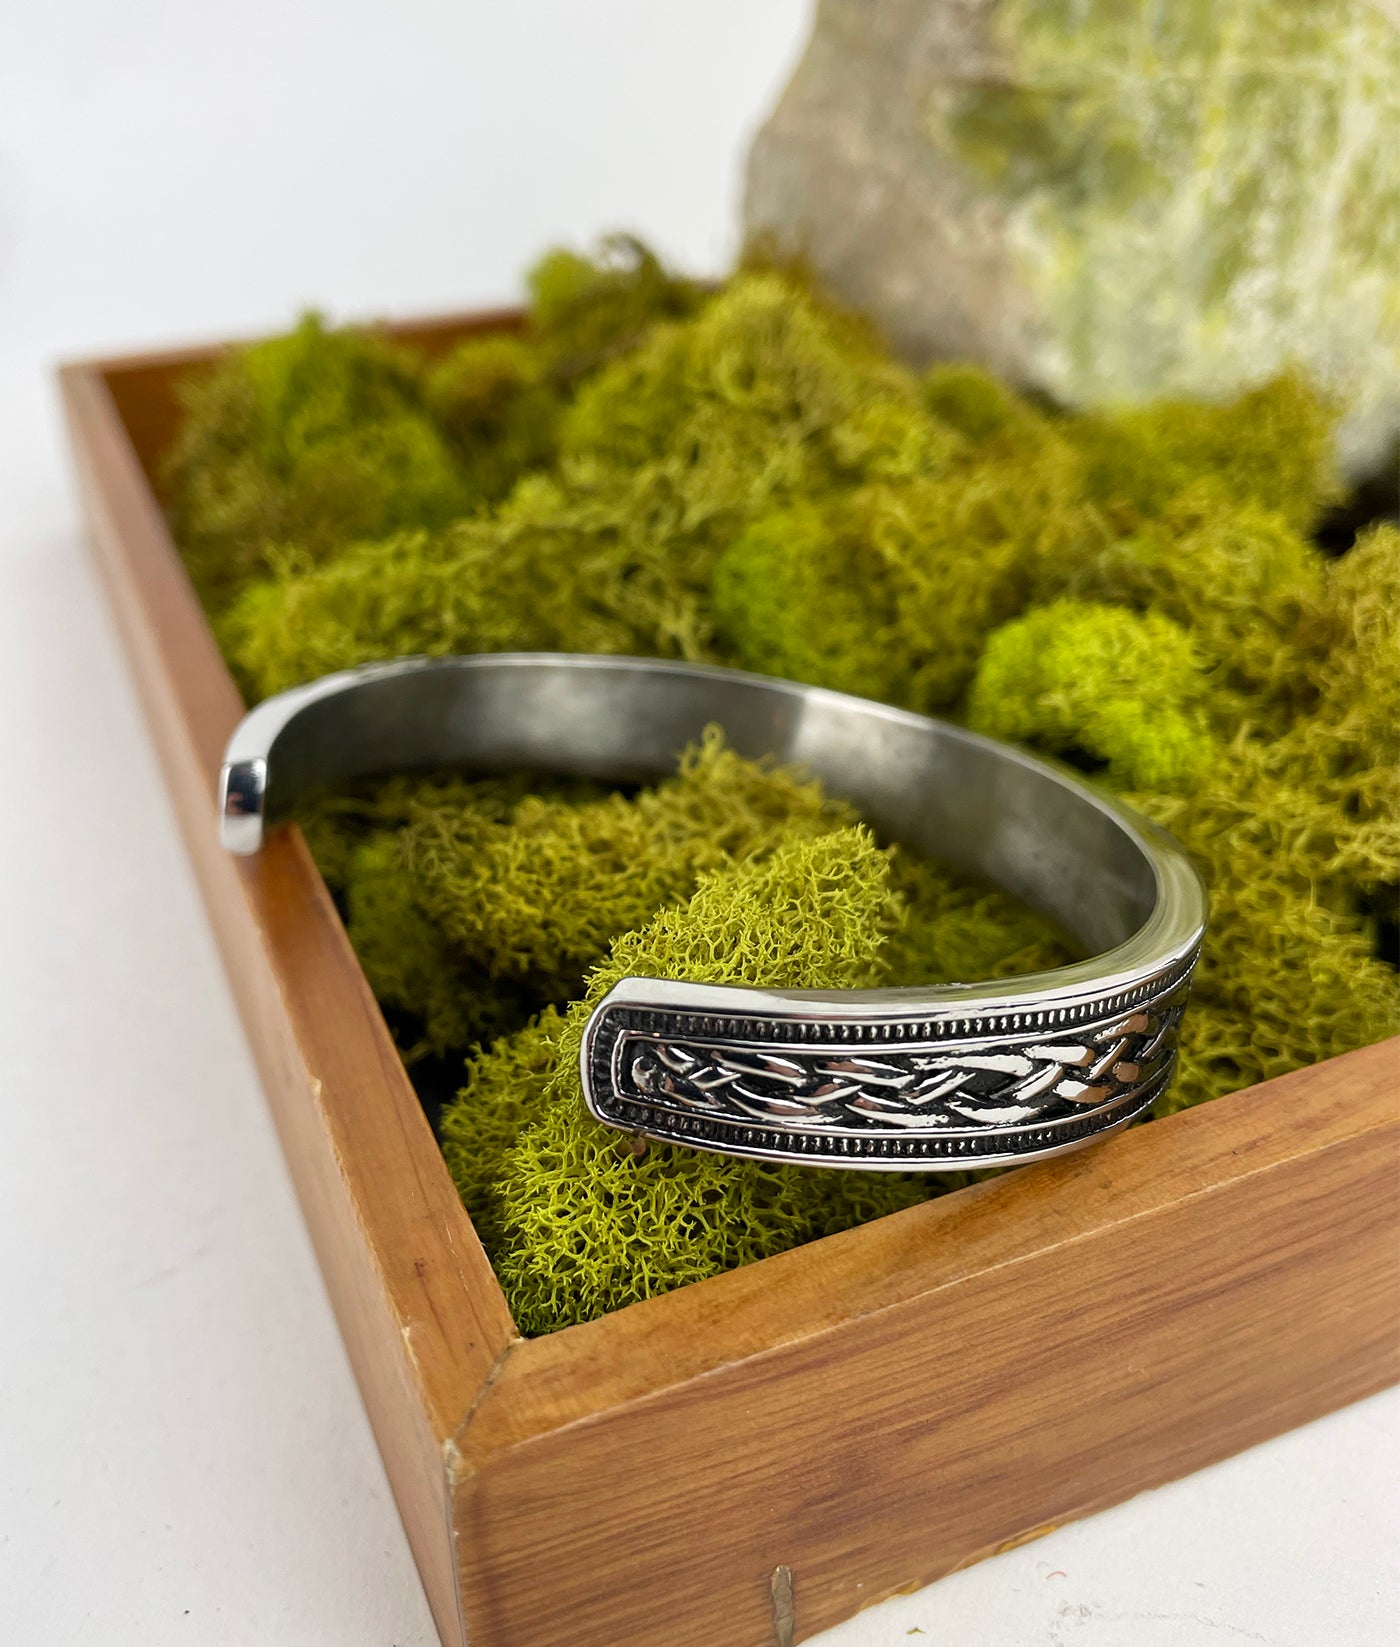 Men's Stainless Steel Cuff Bracelet with Thor's Hammer and Celtic Knot details